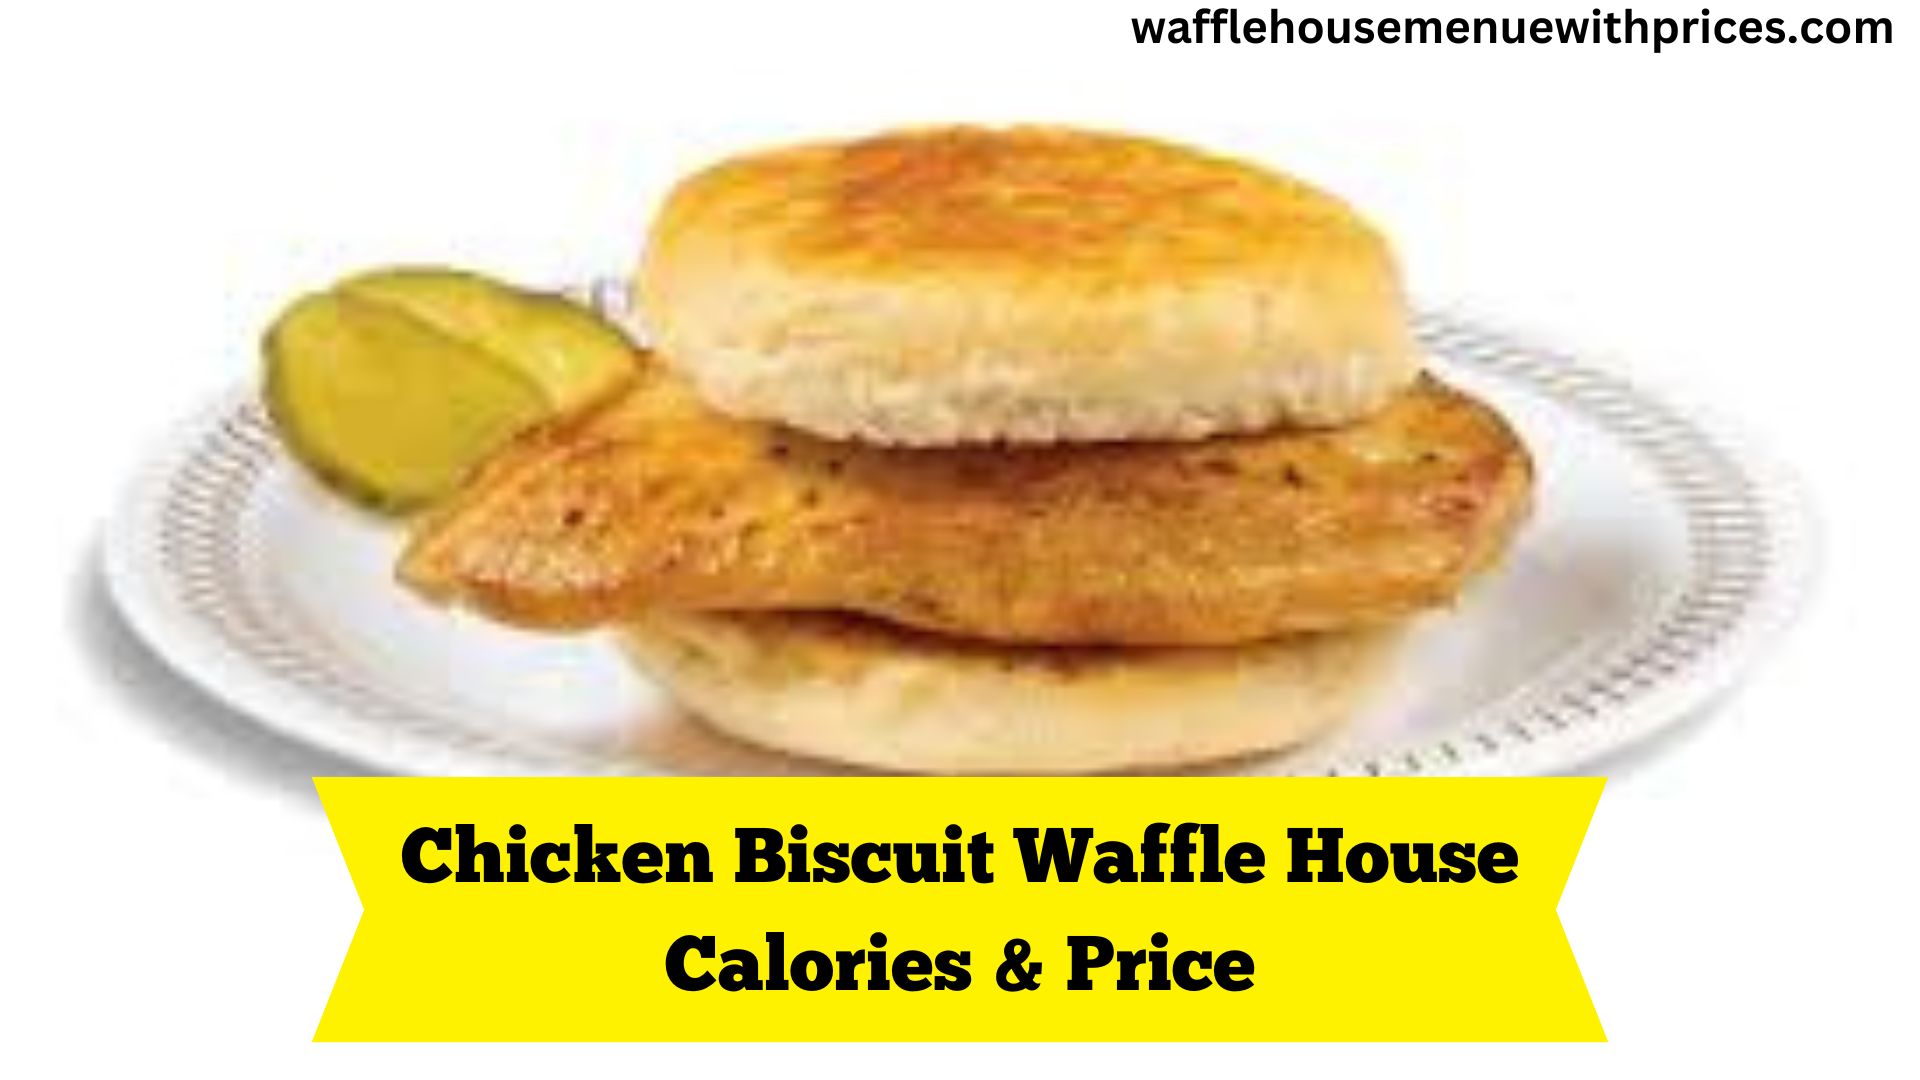 Chicken biscuit waffle house